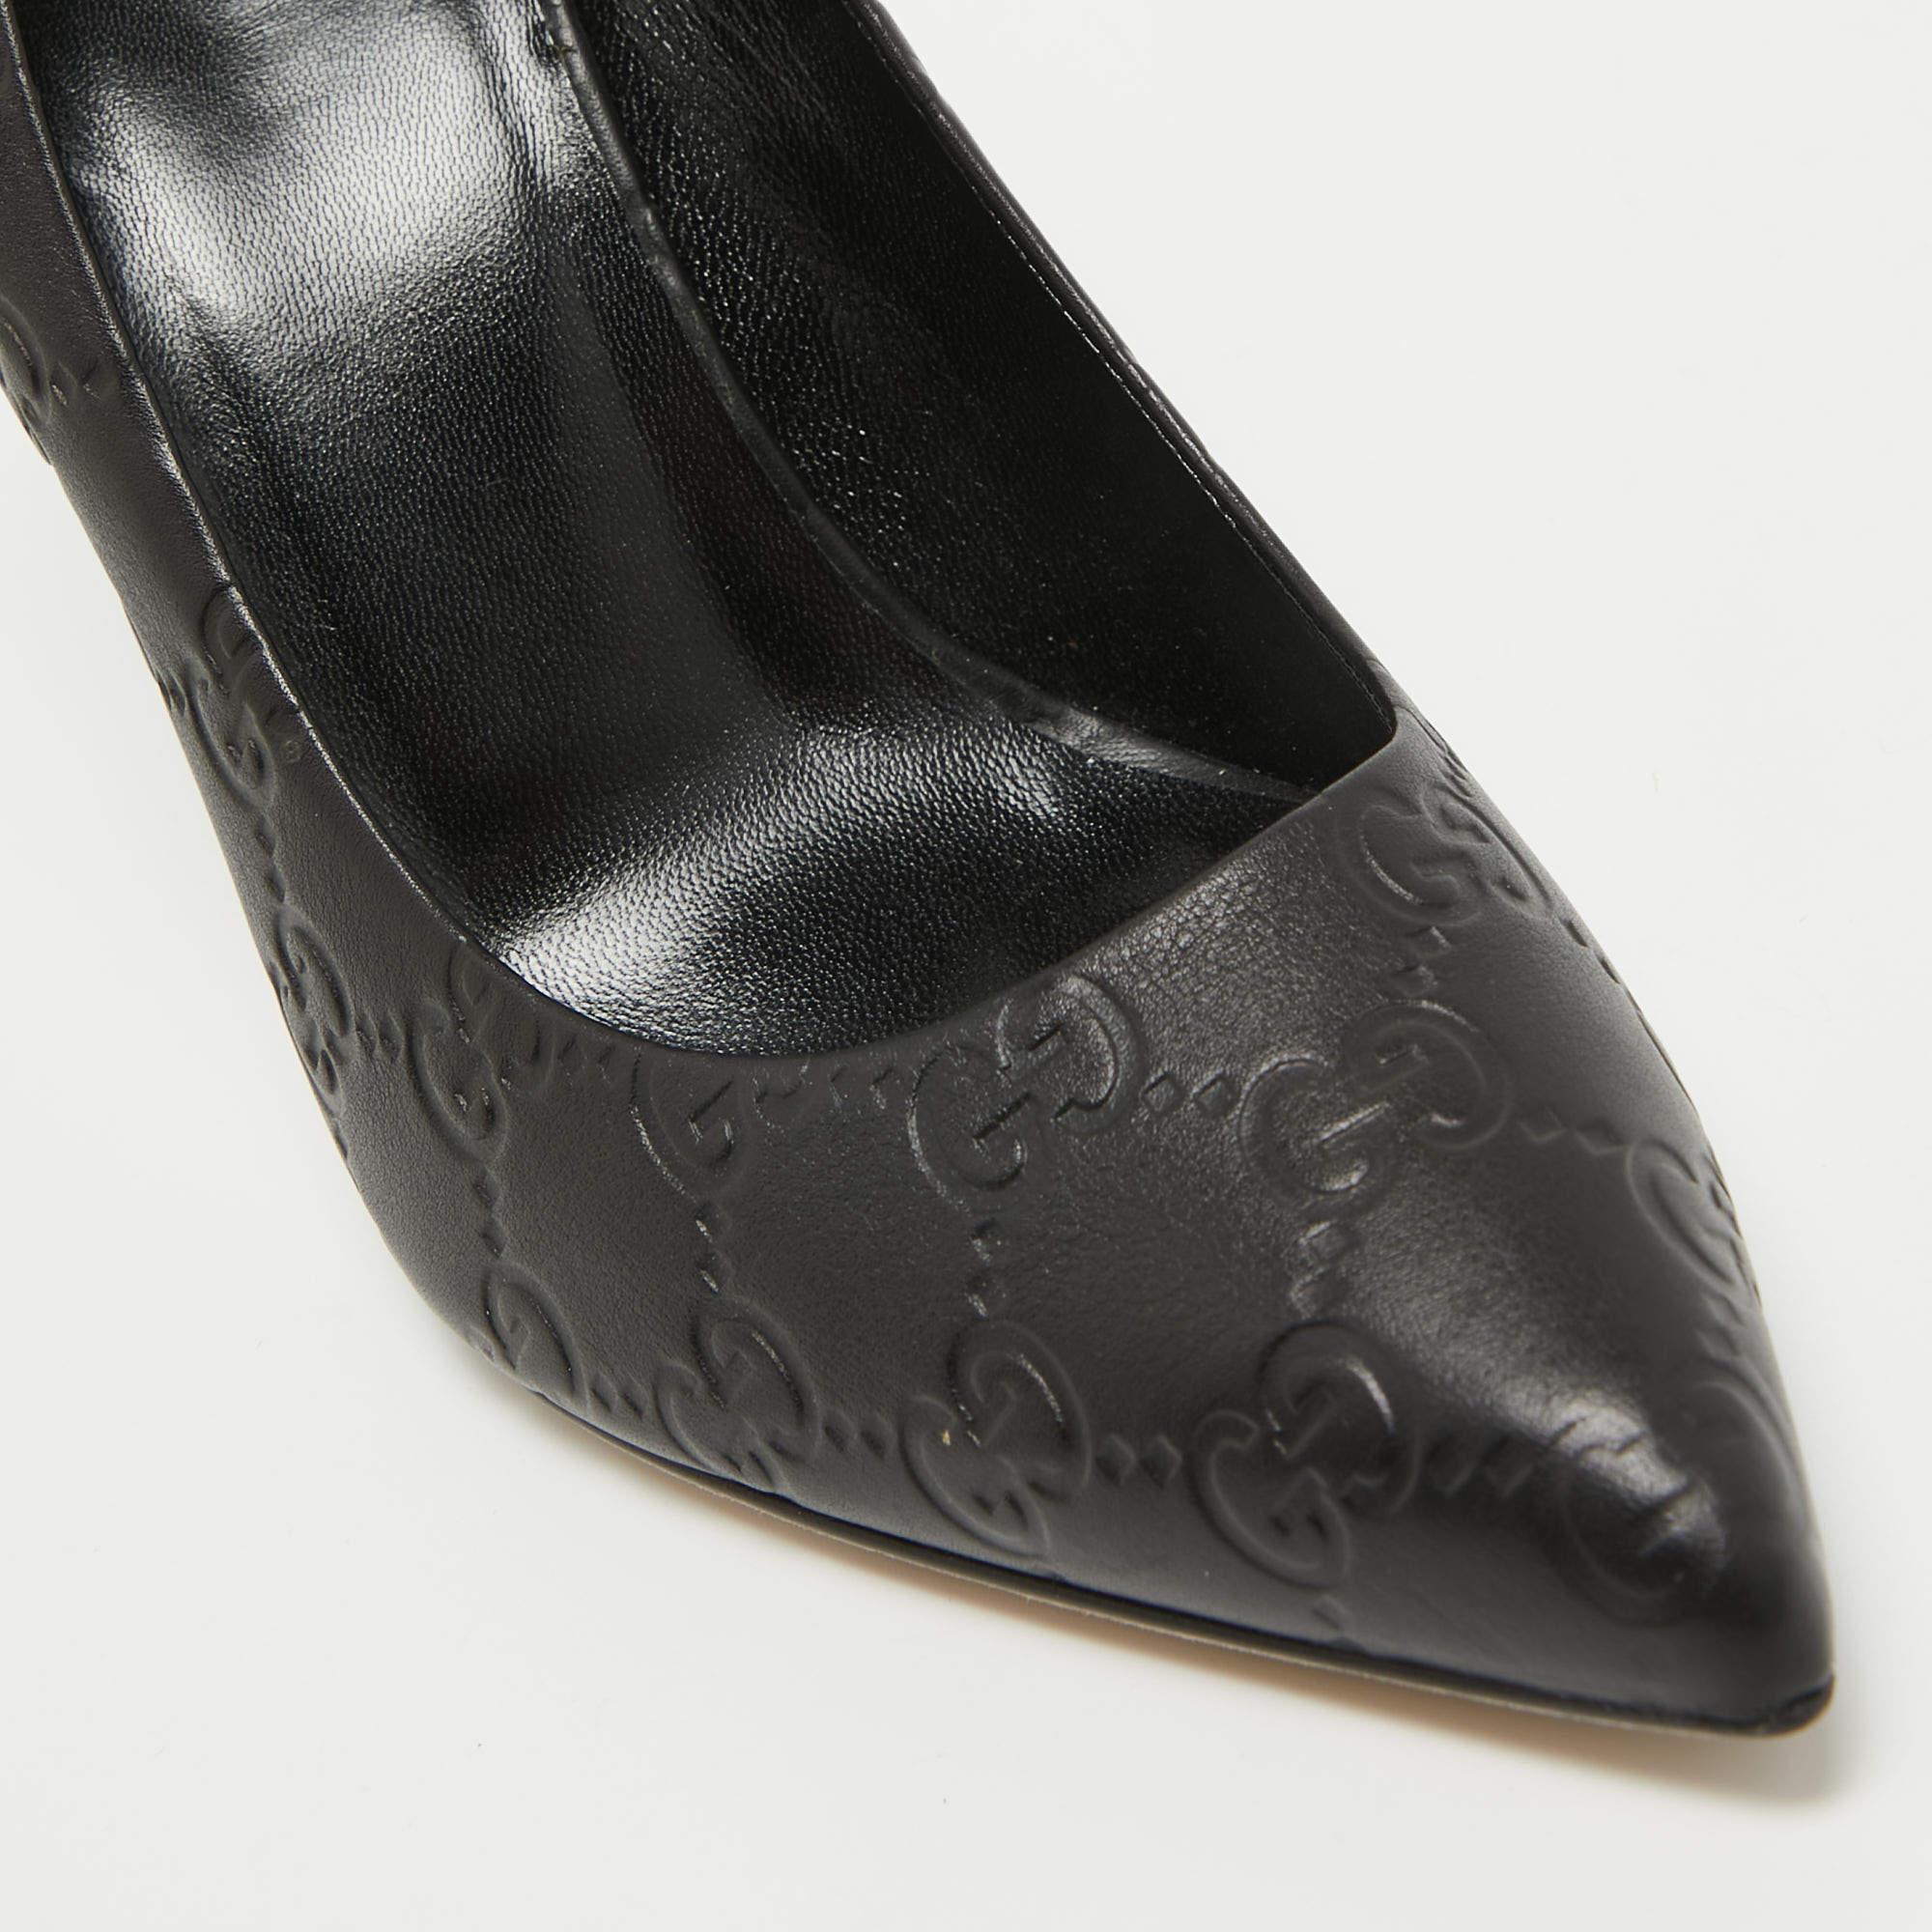 Gucci Black Guccissima Leather Kristen Bamboo Heel Pumps Size 39 For Sale 1